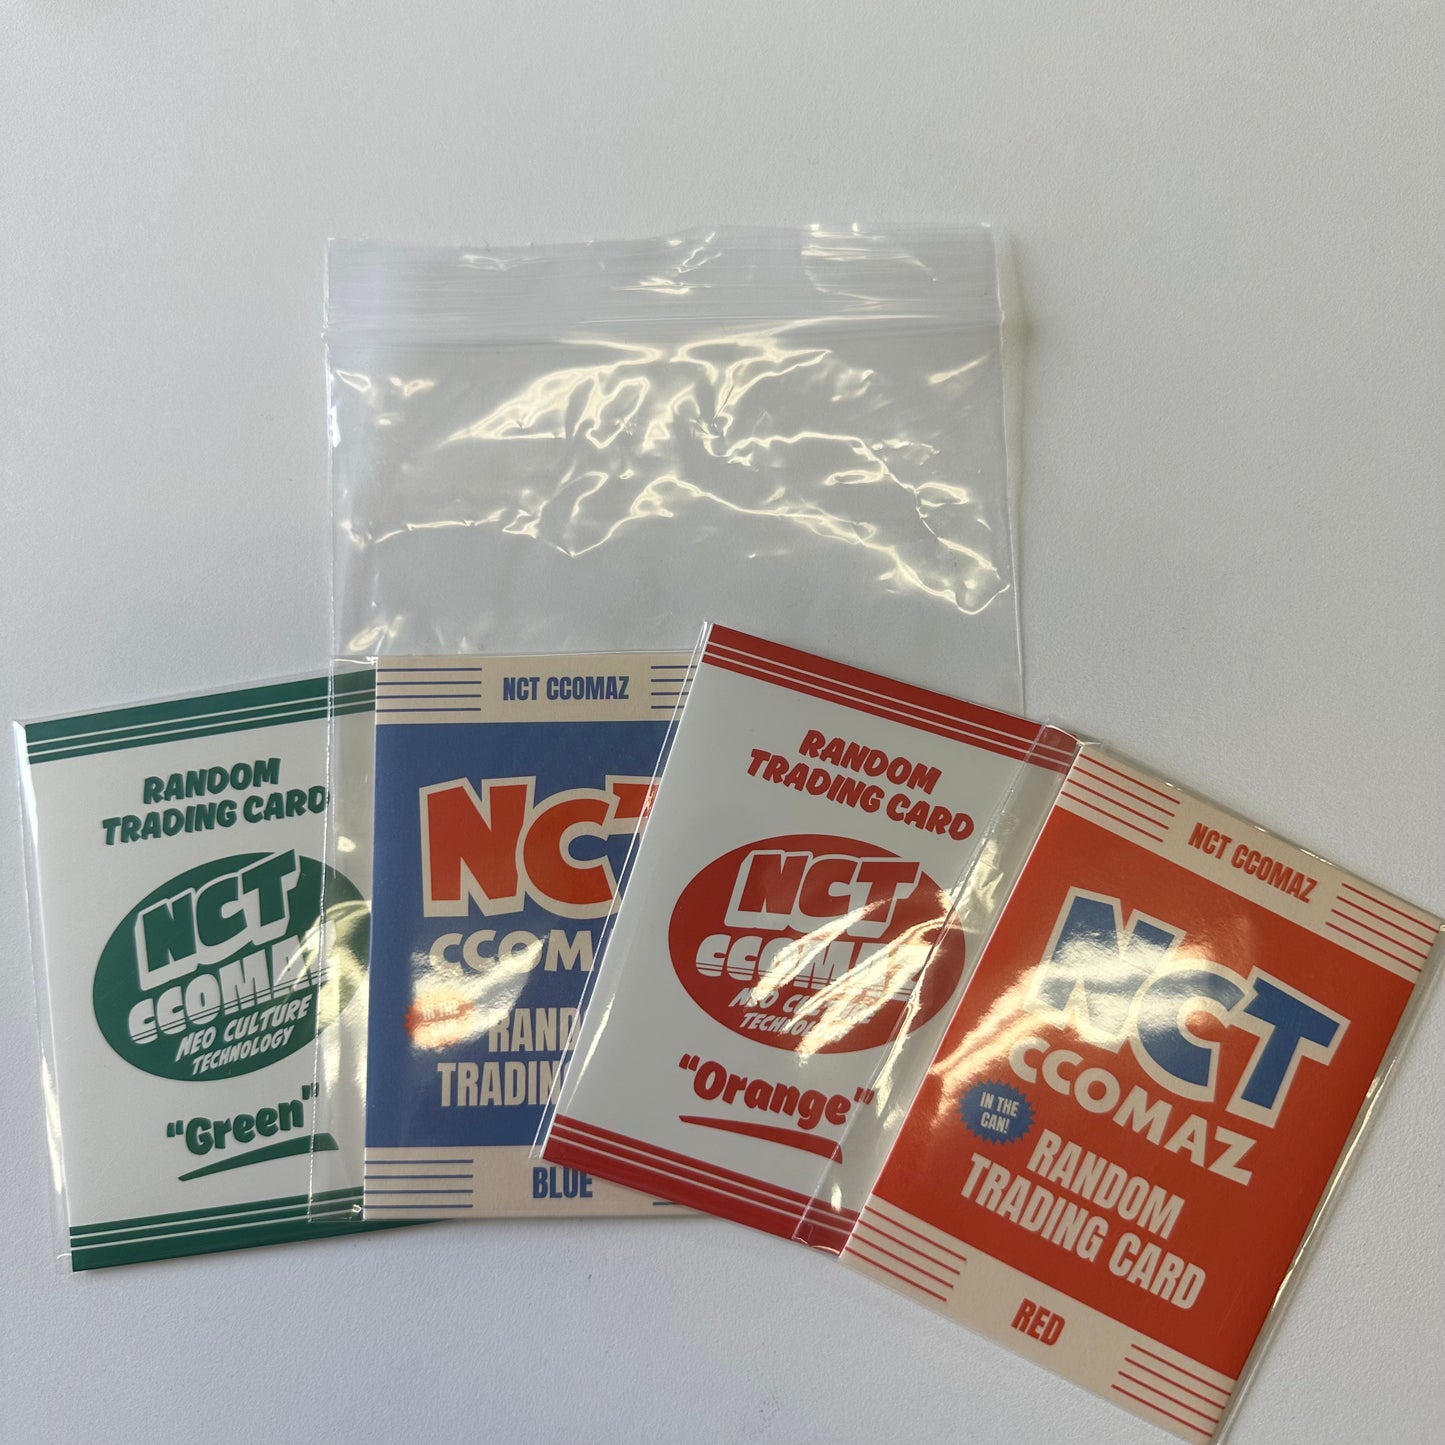 (4 PACK SET) NCT CCOMAZ TRADING CARDS